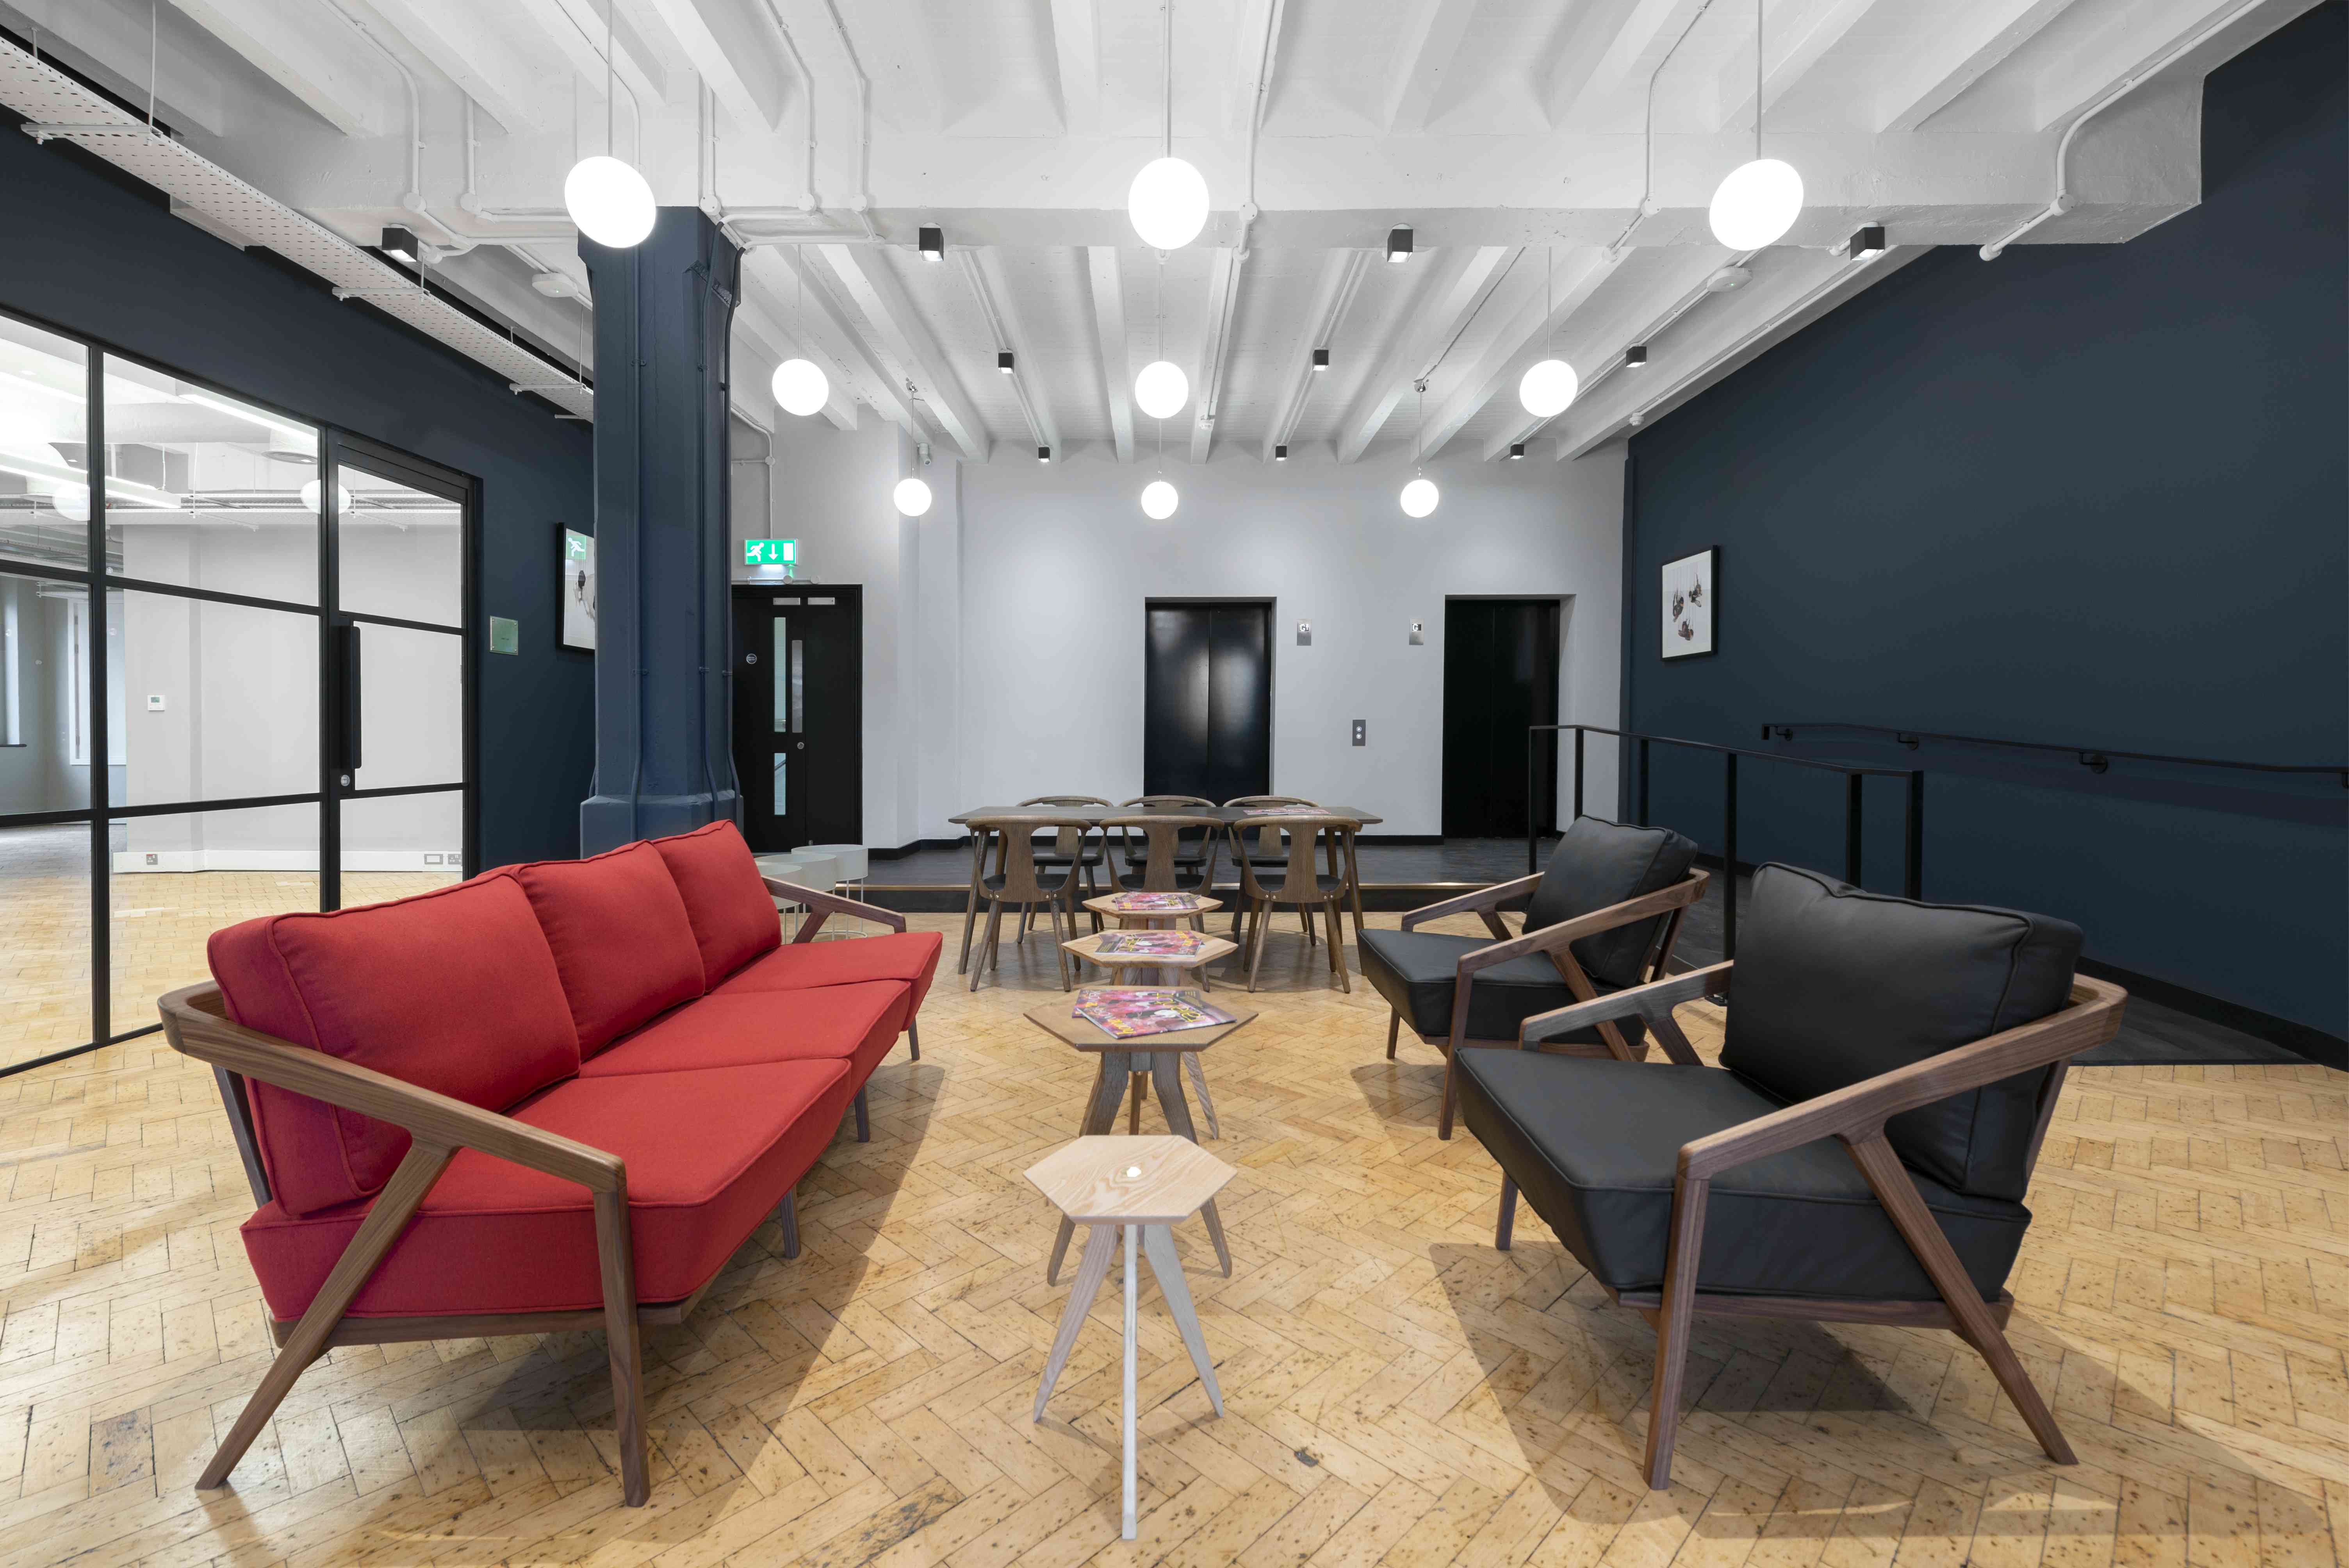 Goswell Road Communal Workspace® | Goswell Road London 020 3733 7370